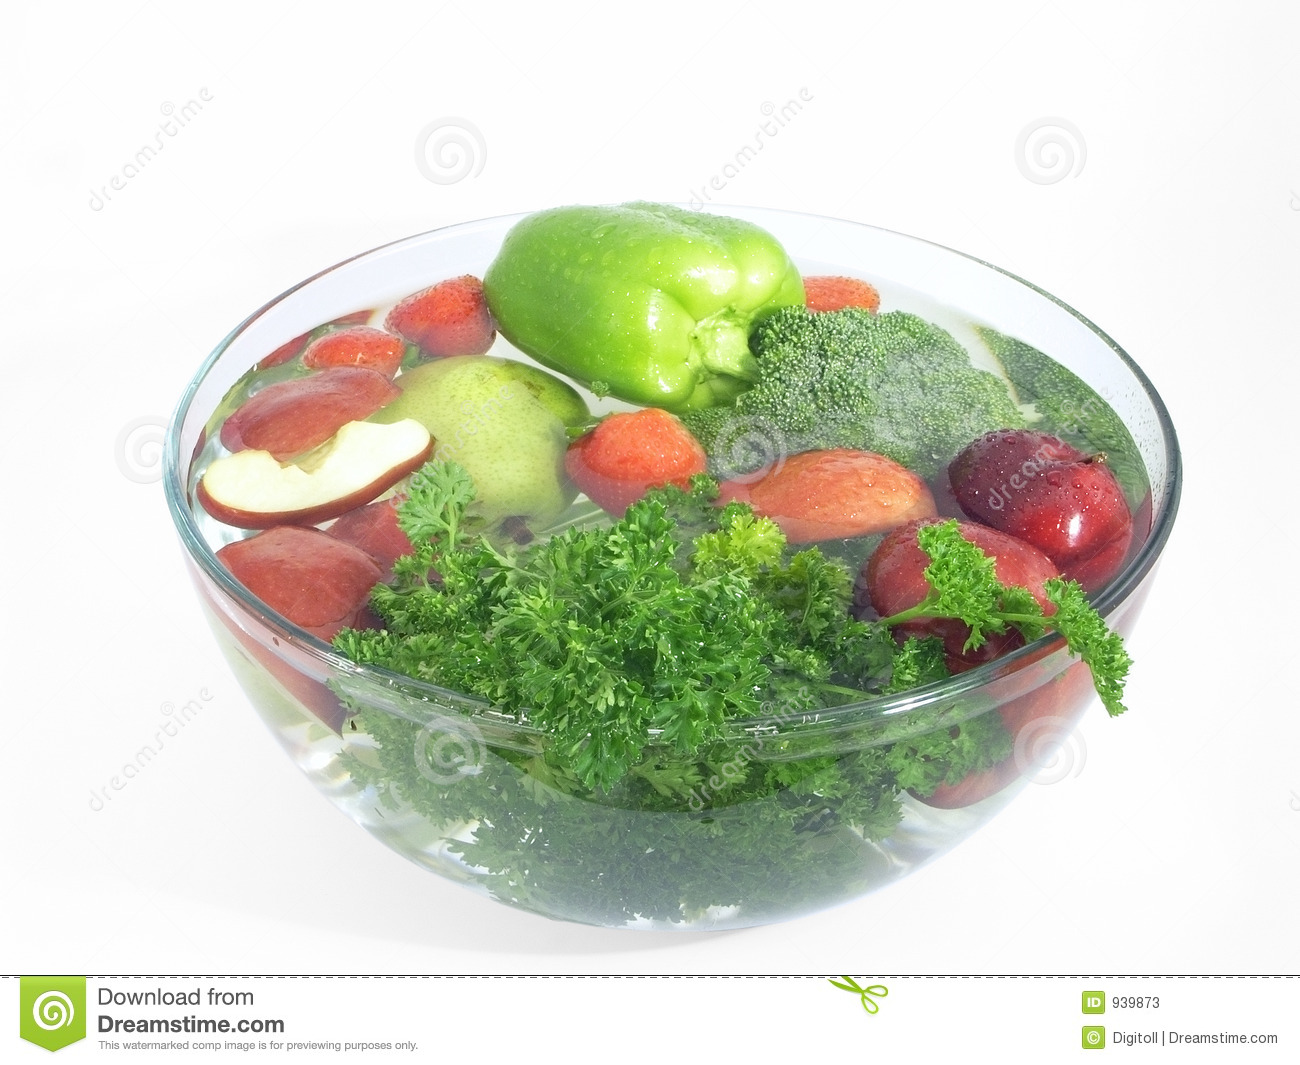 Vegetables And Fruits In Clear Wash Bowlclick The Below Links To View    